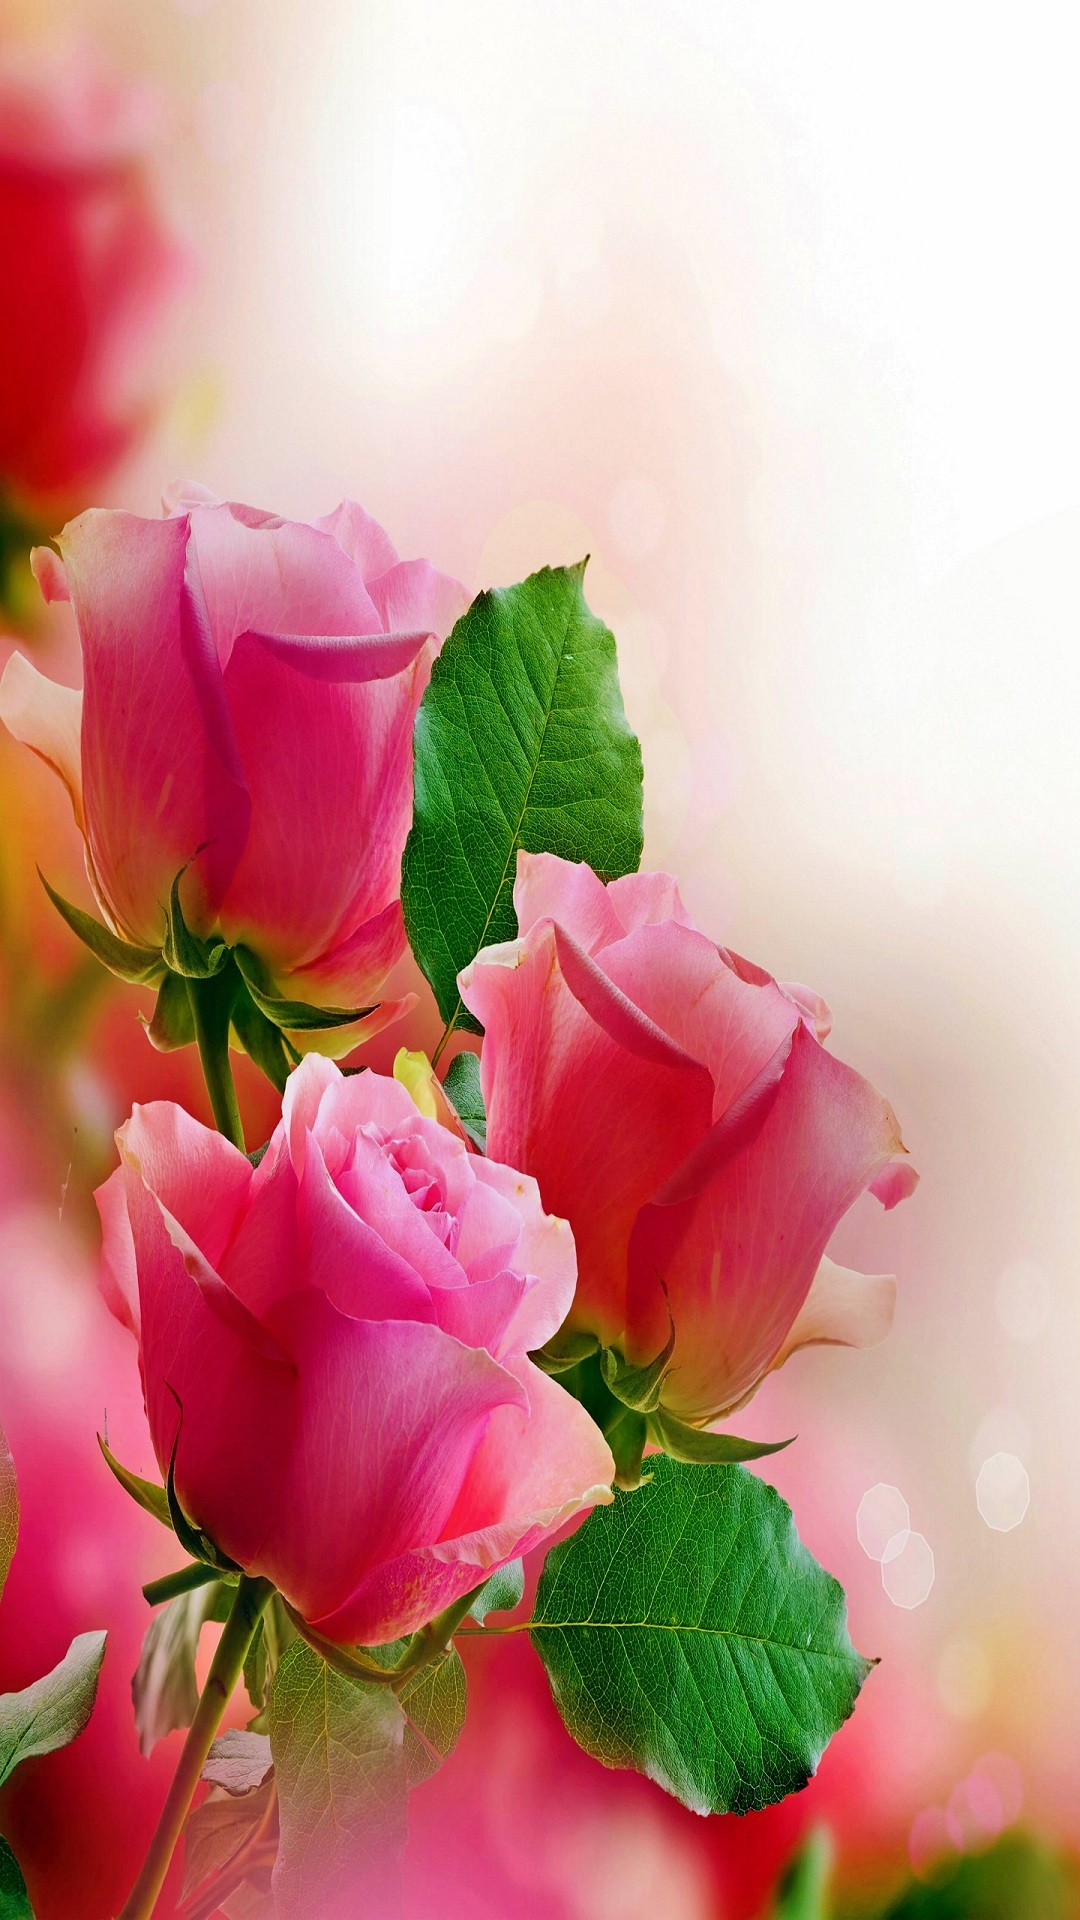 Pink Roses for Apple iPhone 6S & 7 Plus resolution